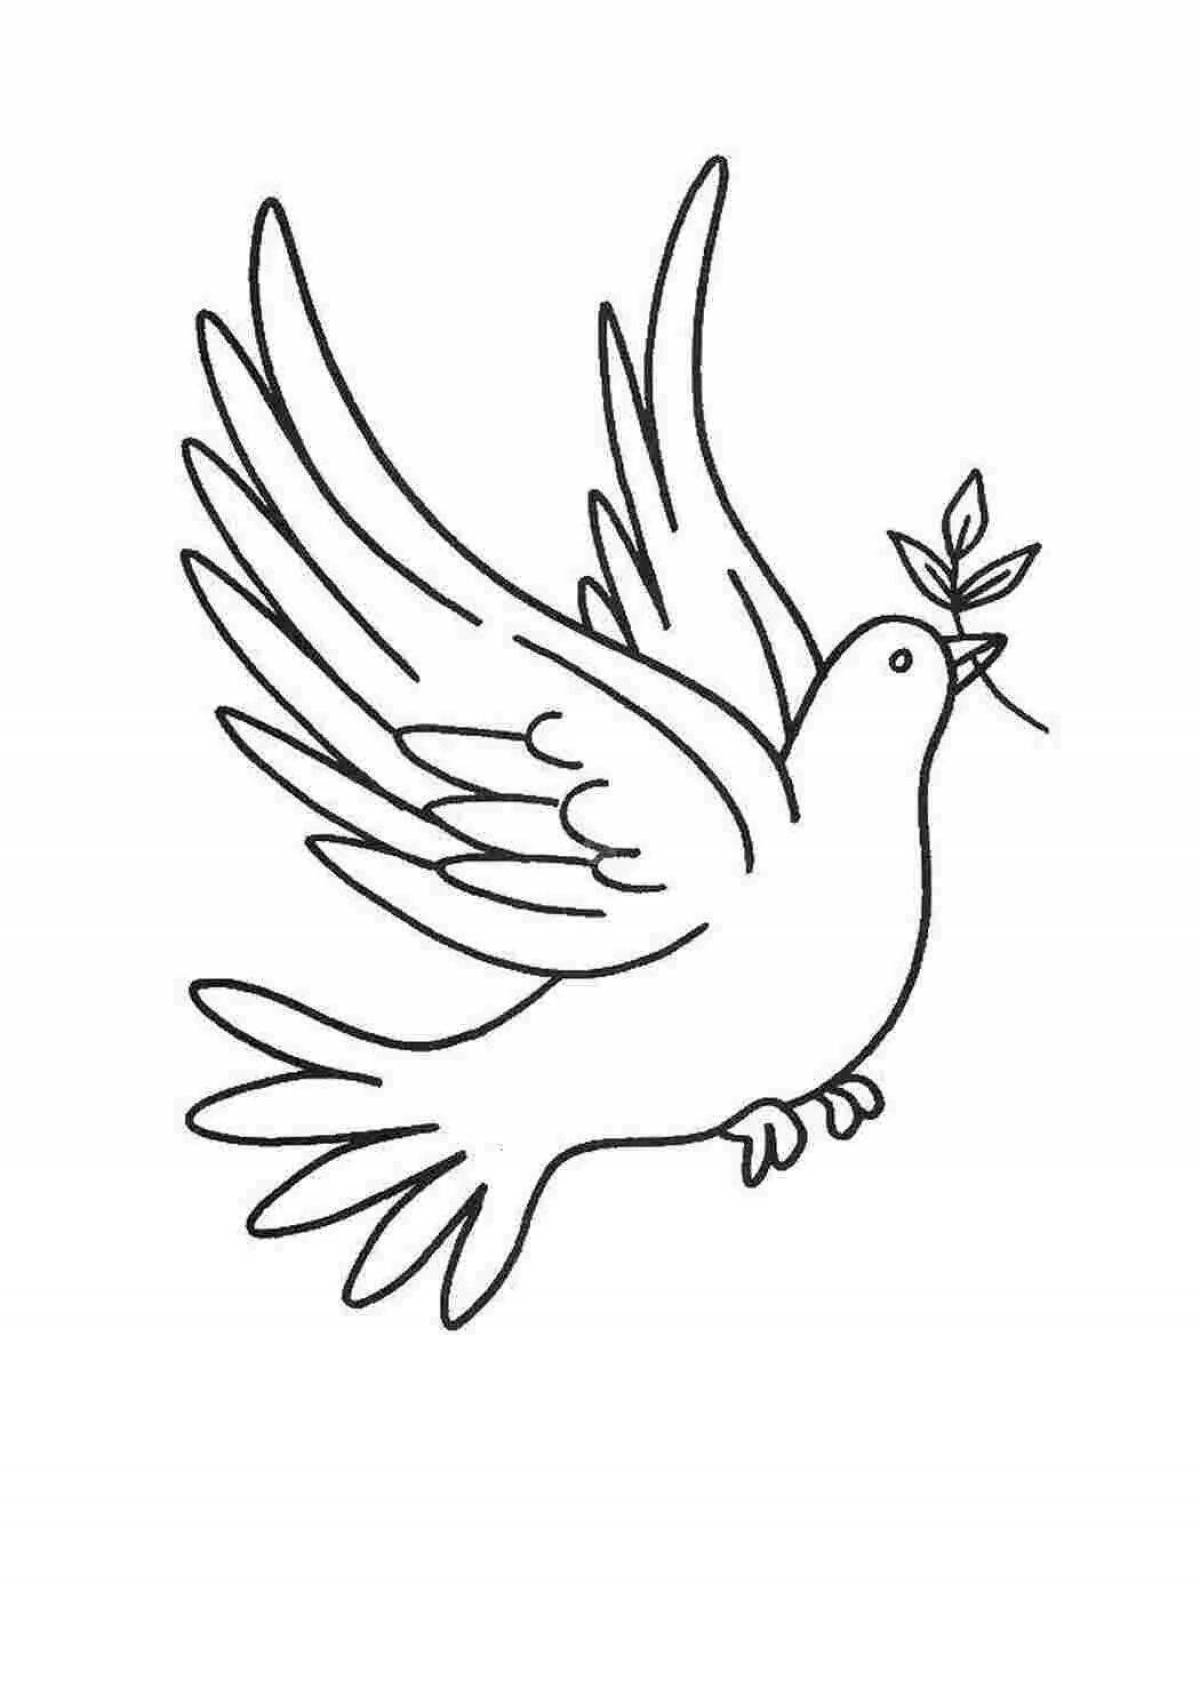 Shiny dove of victory coloring page